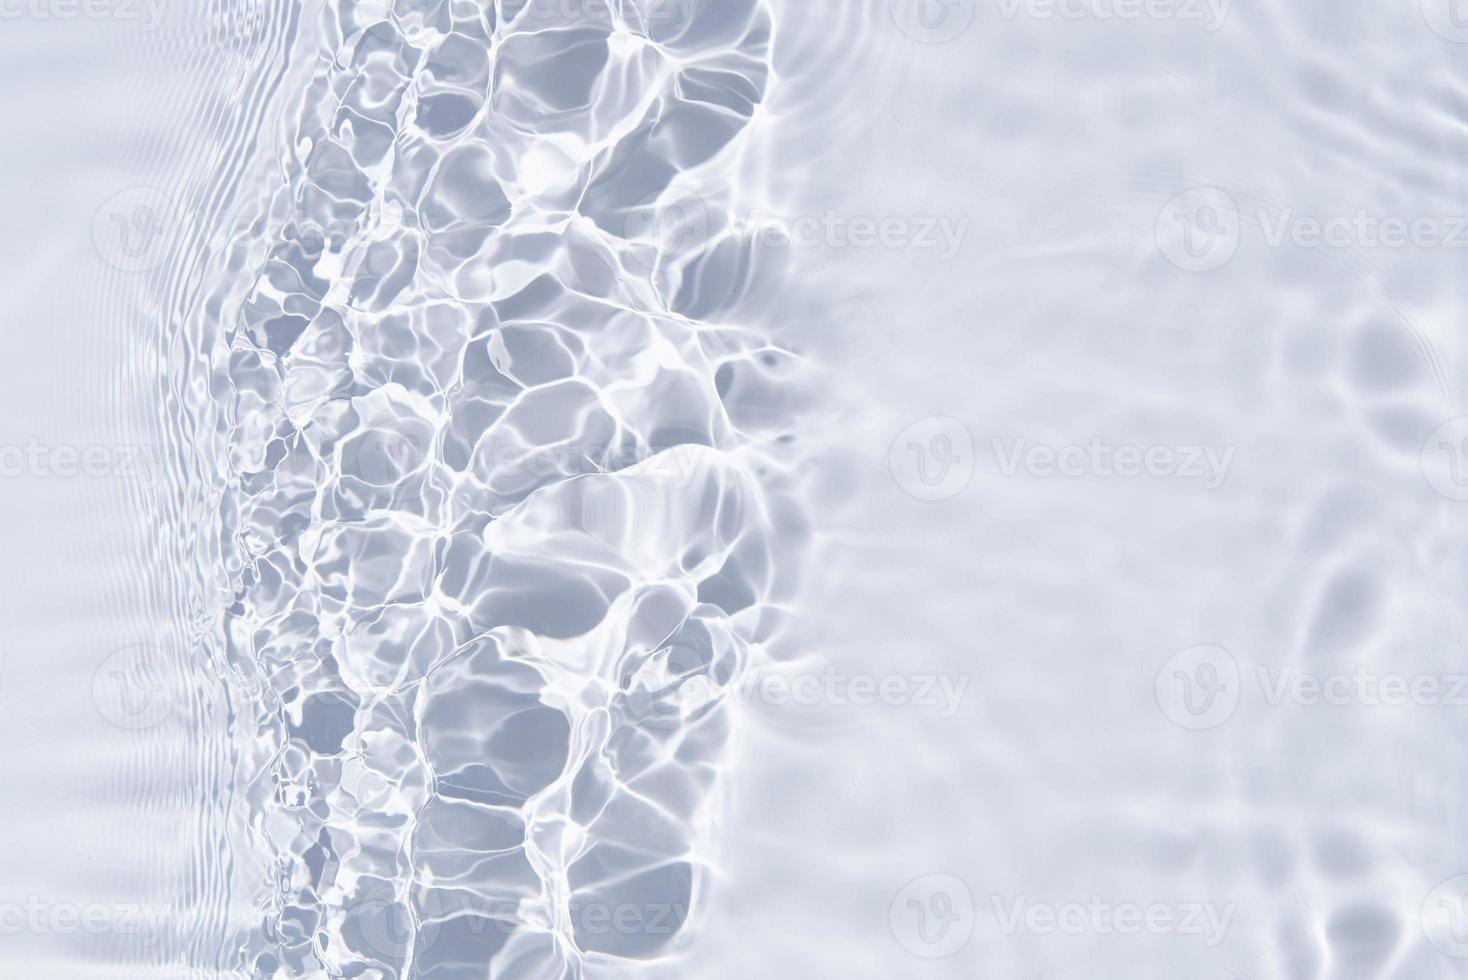 wit water structuur achtergrond. abstract patroon foto